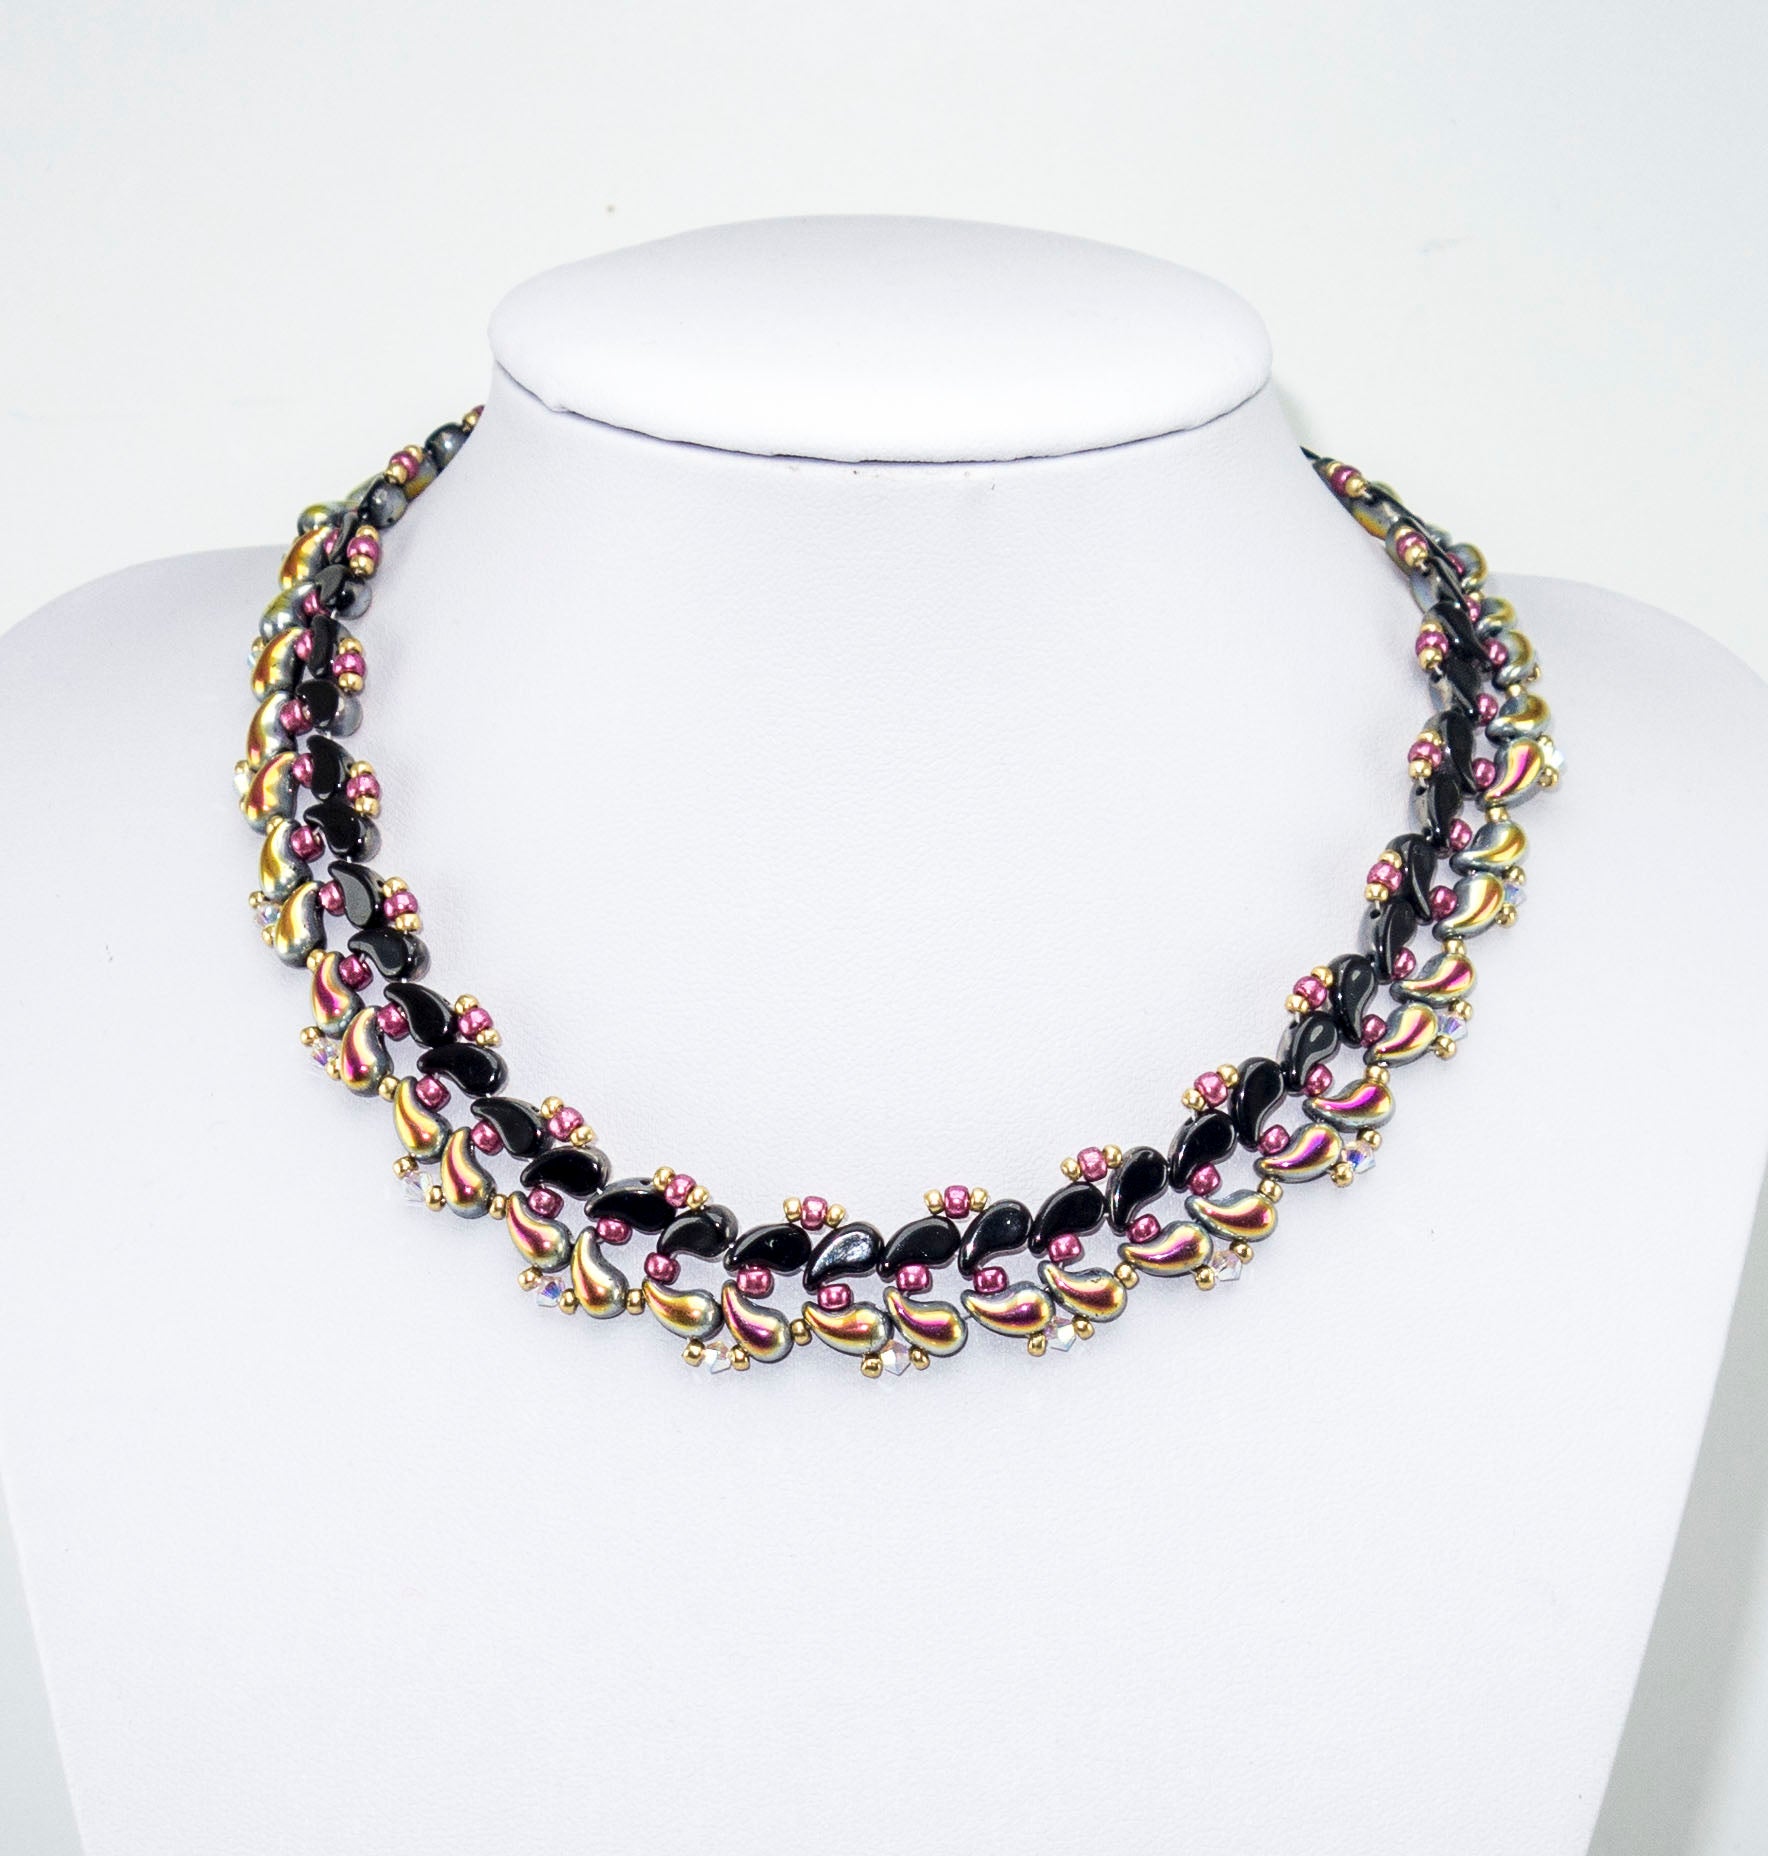 Free Tutorial: Necklace made of ZoliDuo